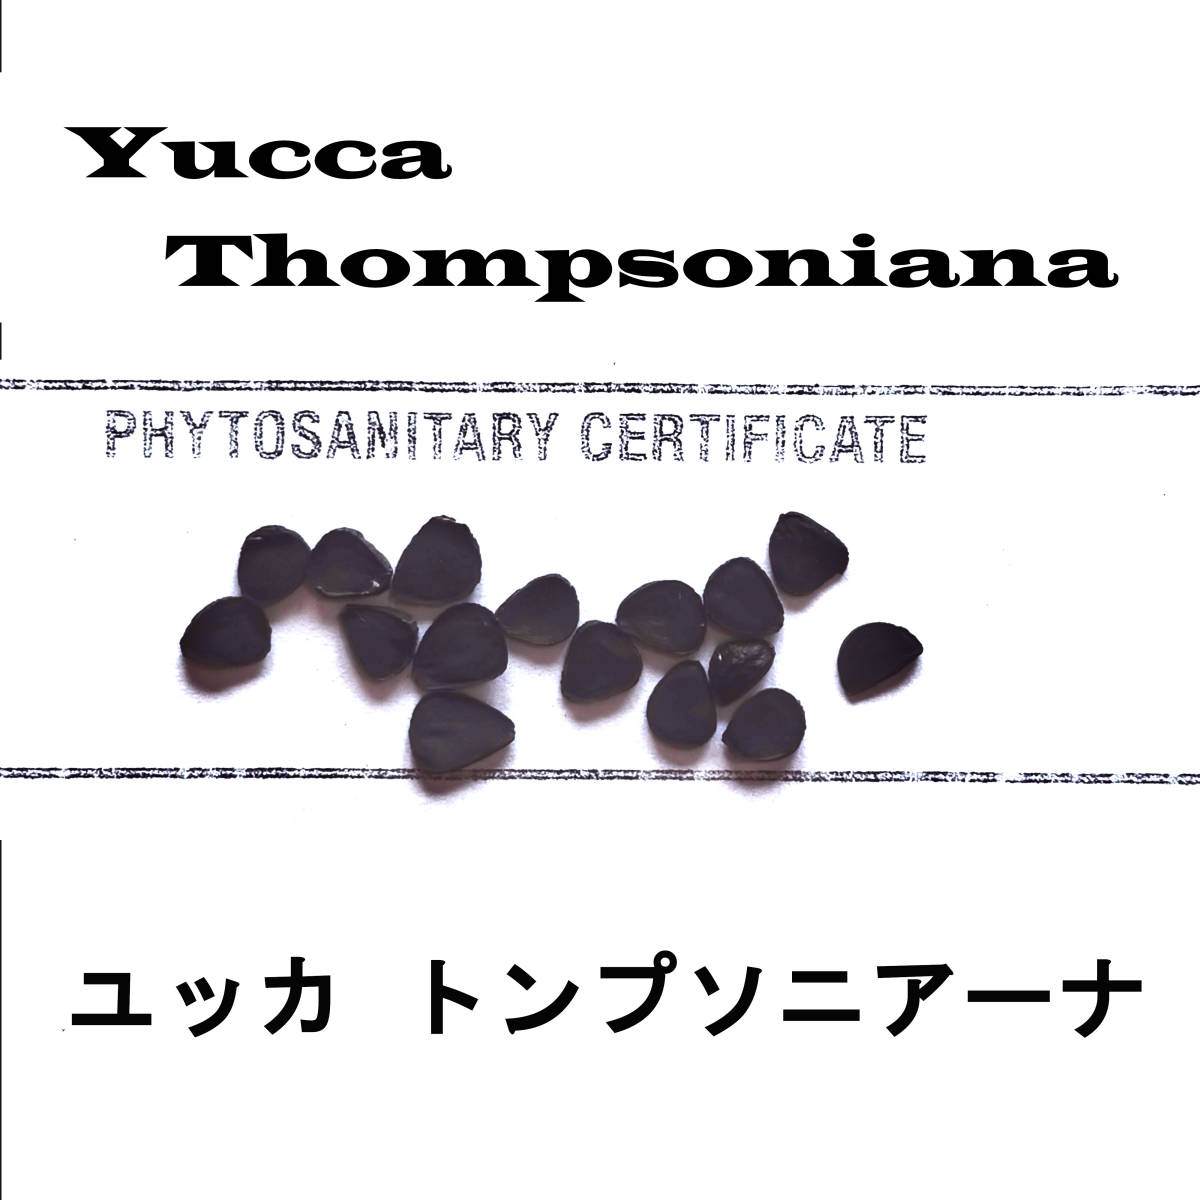 10 month arrival 10 bead + yucca ton p Sony a-na seeds kind certificate equipped 